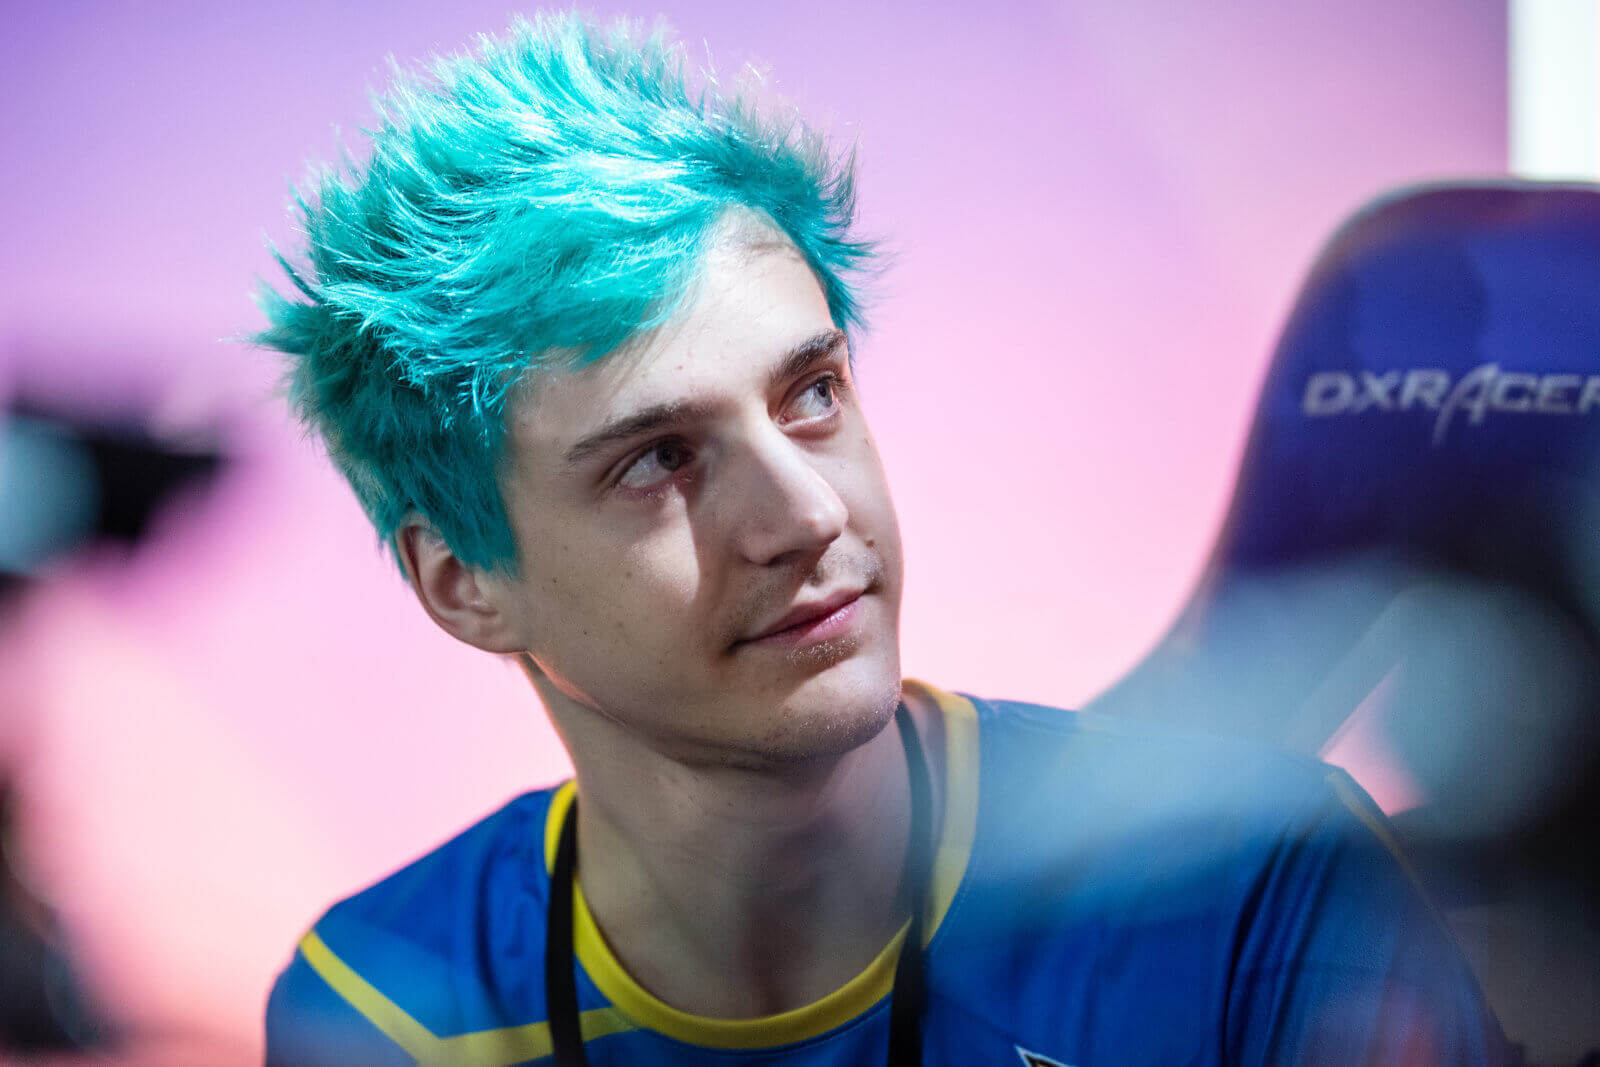 Ninja becomes the first pro gamer to be sponsored by Adidas